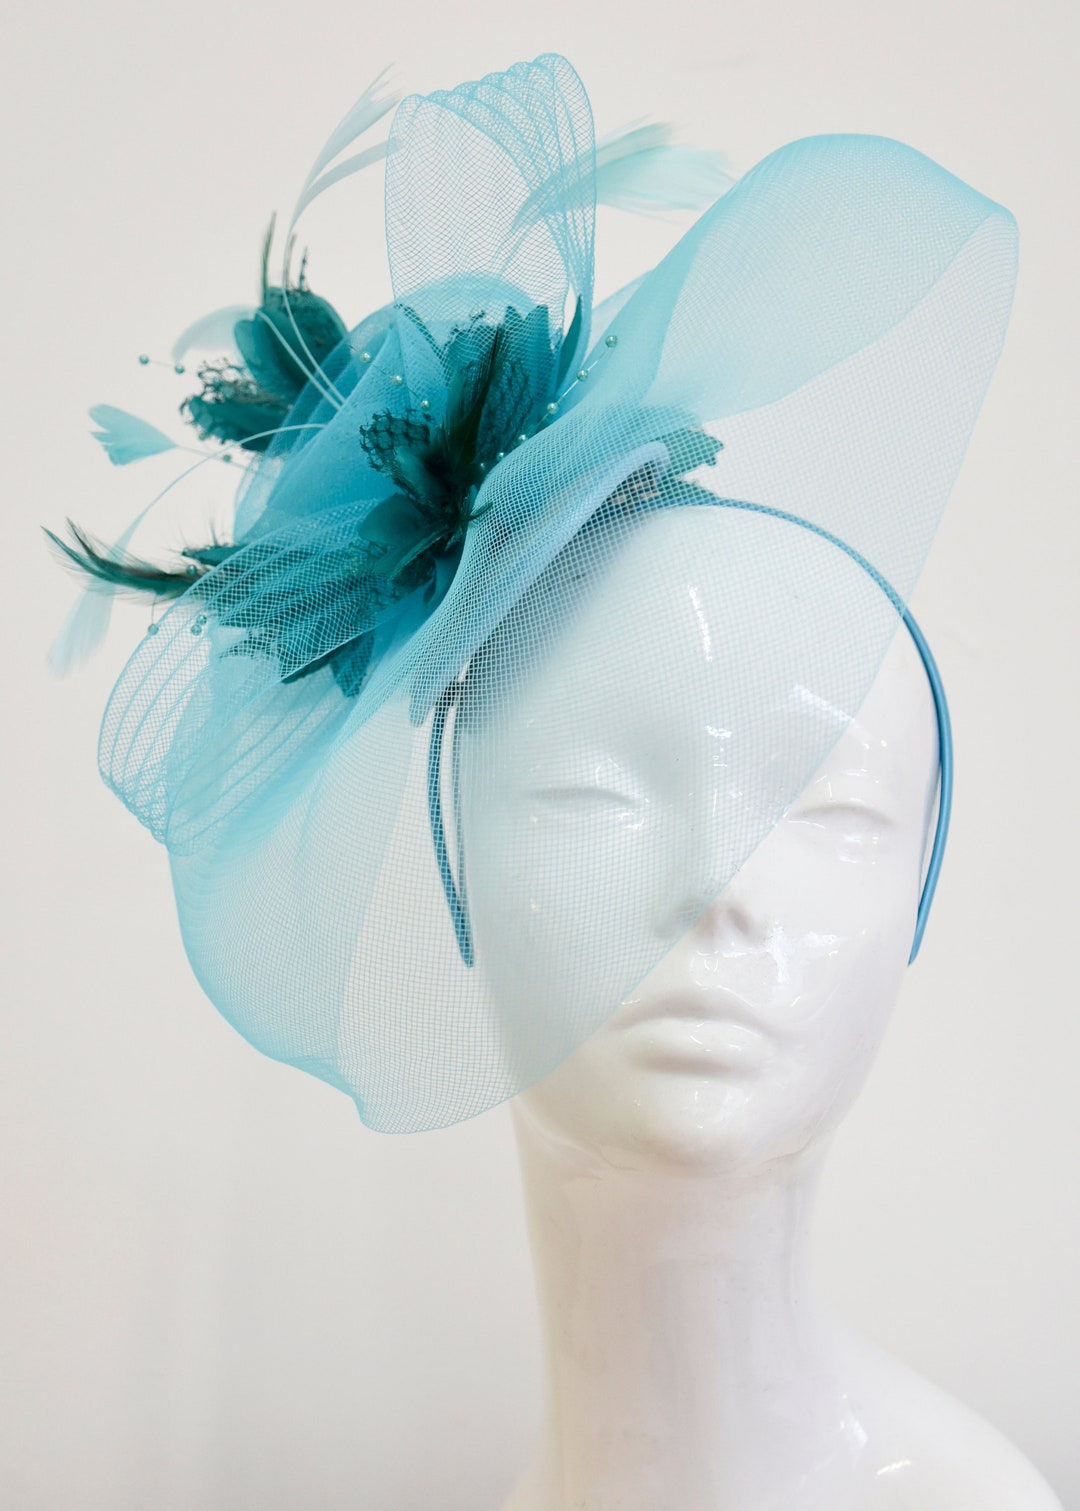 Big Light Turquoise Blue and Teal Fascinator Hat Veil Net Hair - Etsy